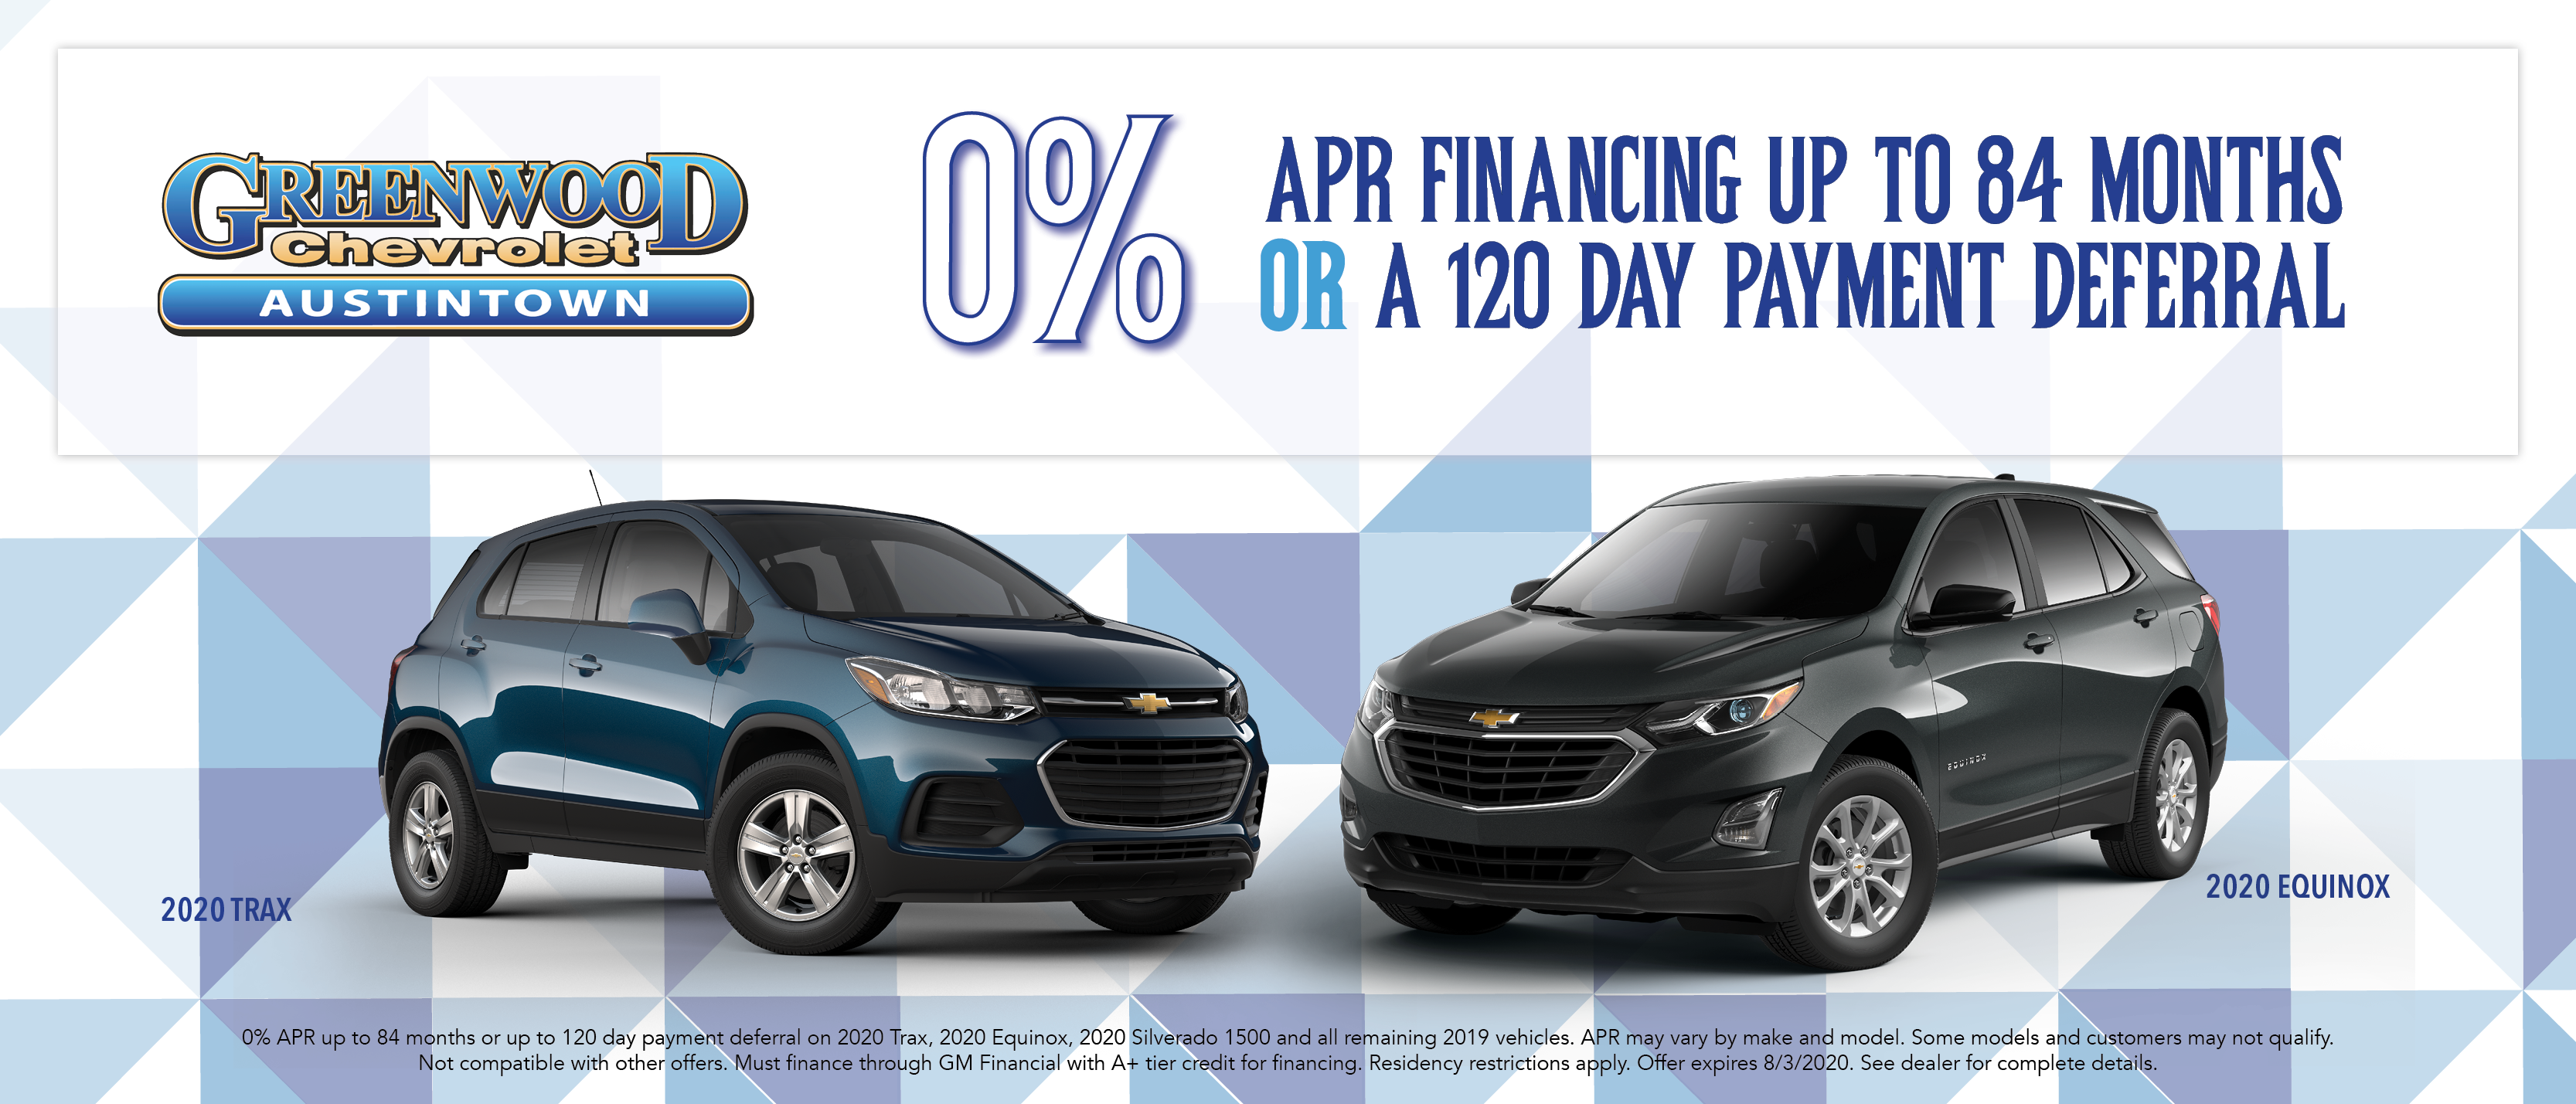 Greenwood Chevrolet | Chevy Sales & Service in Austintown, OH